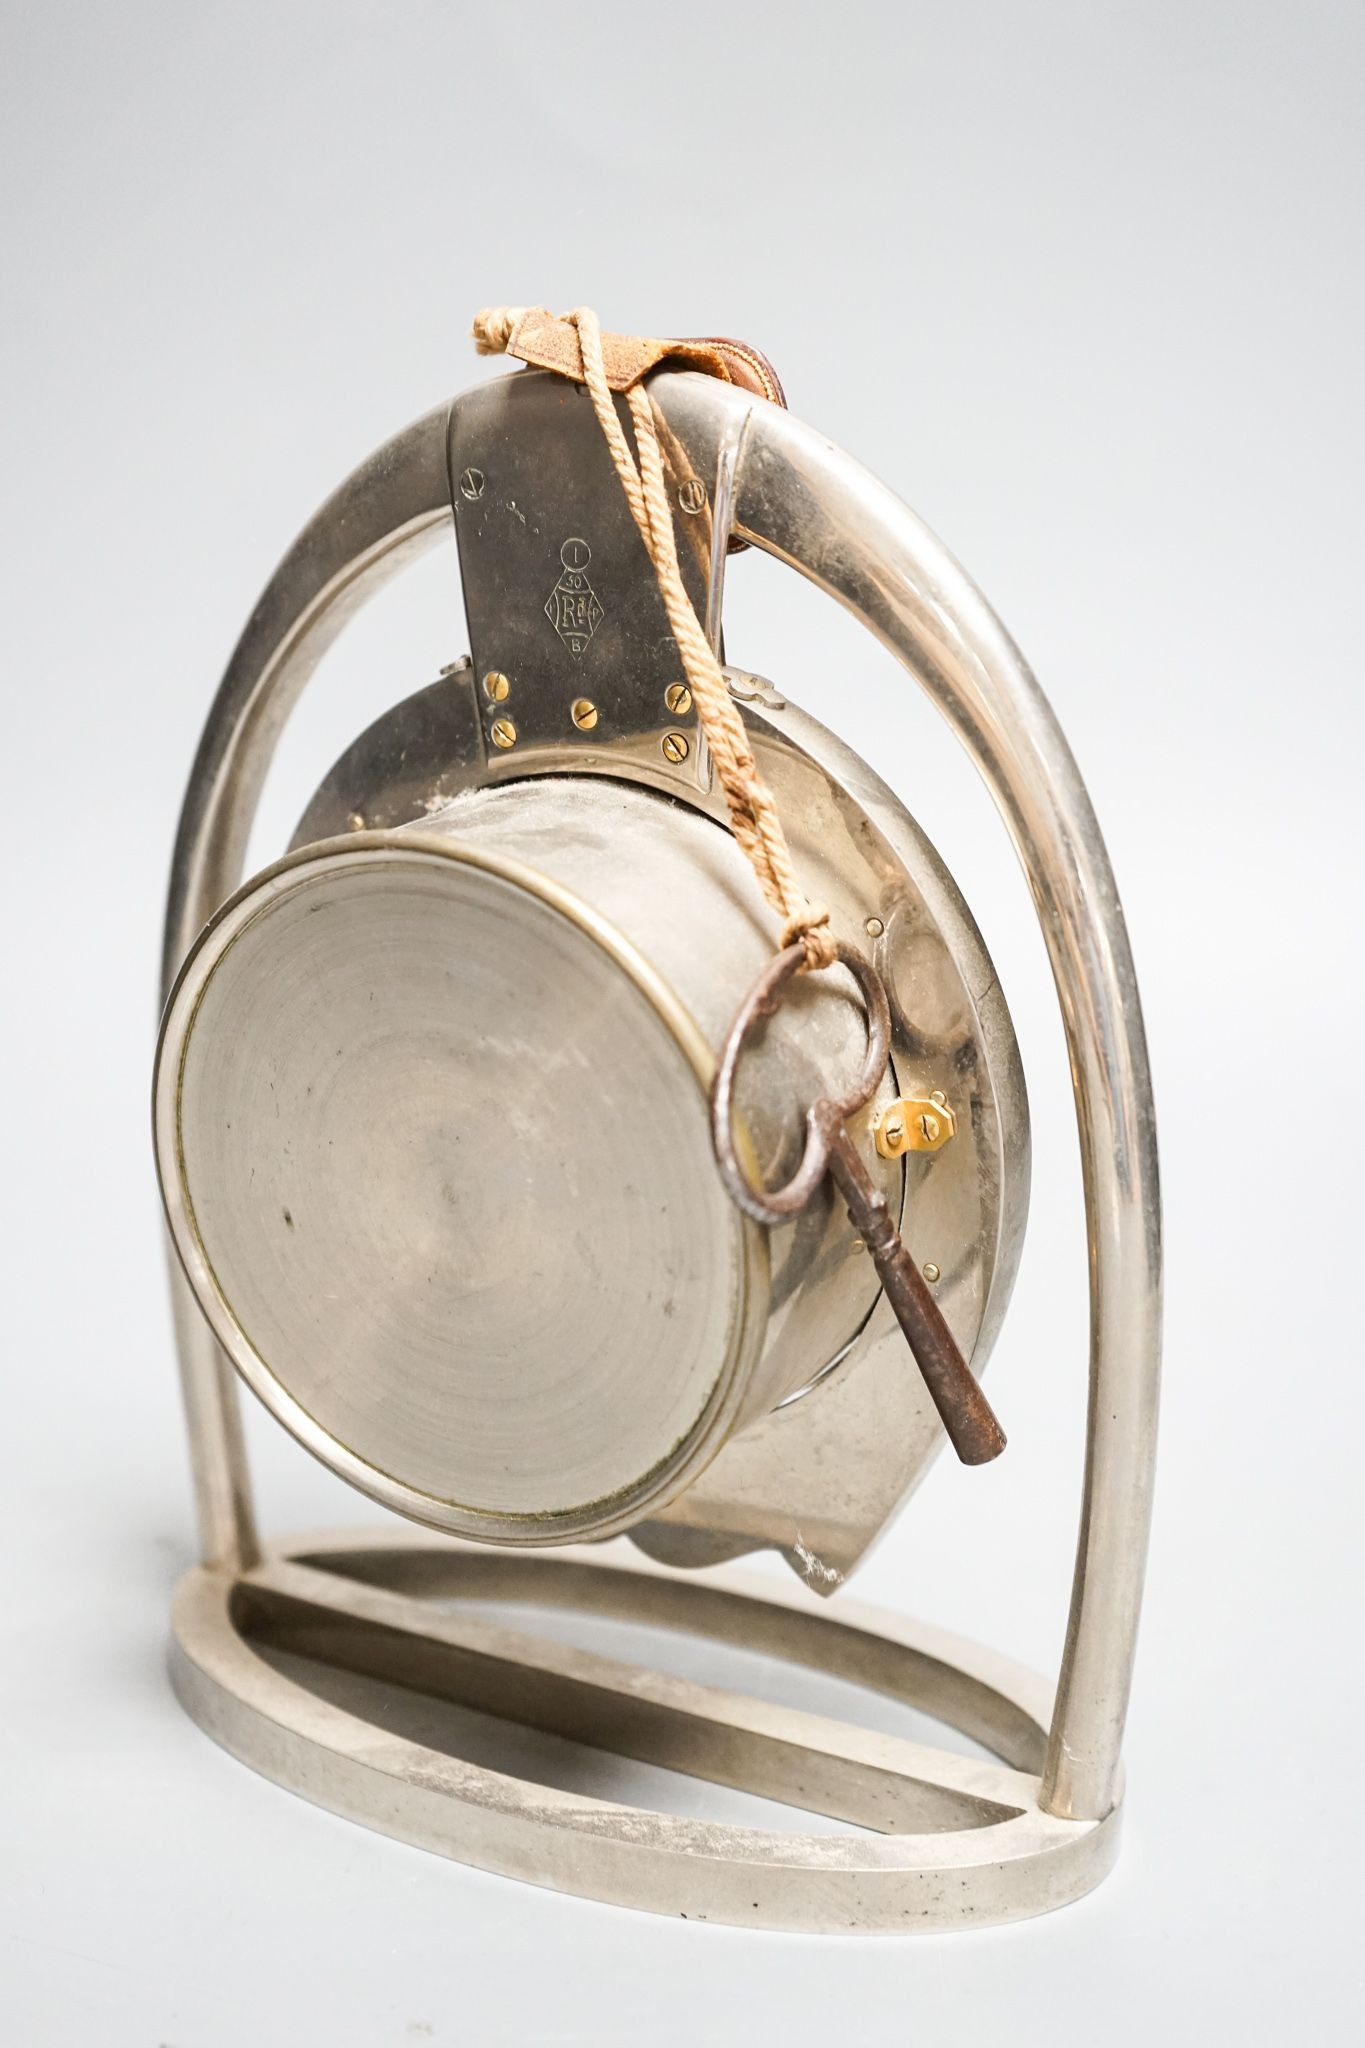 A Victorian patent horseshoe and stirrup mantel clock, French drum movement, the case with registration lozenge mark, with key. 20cm